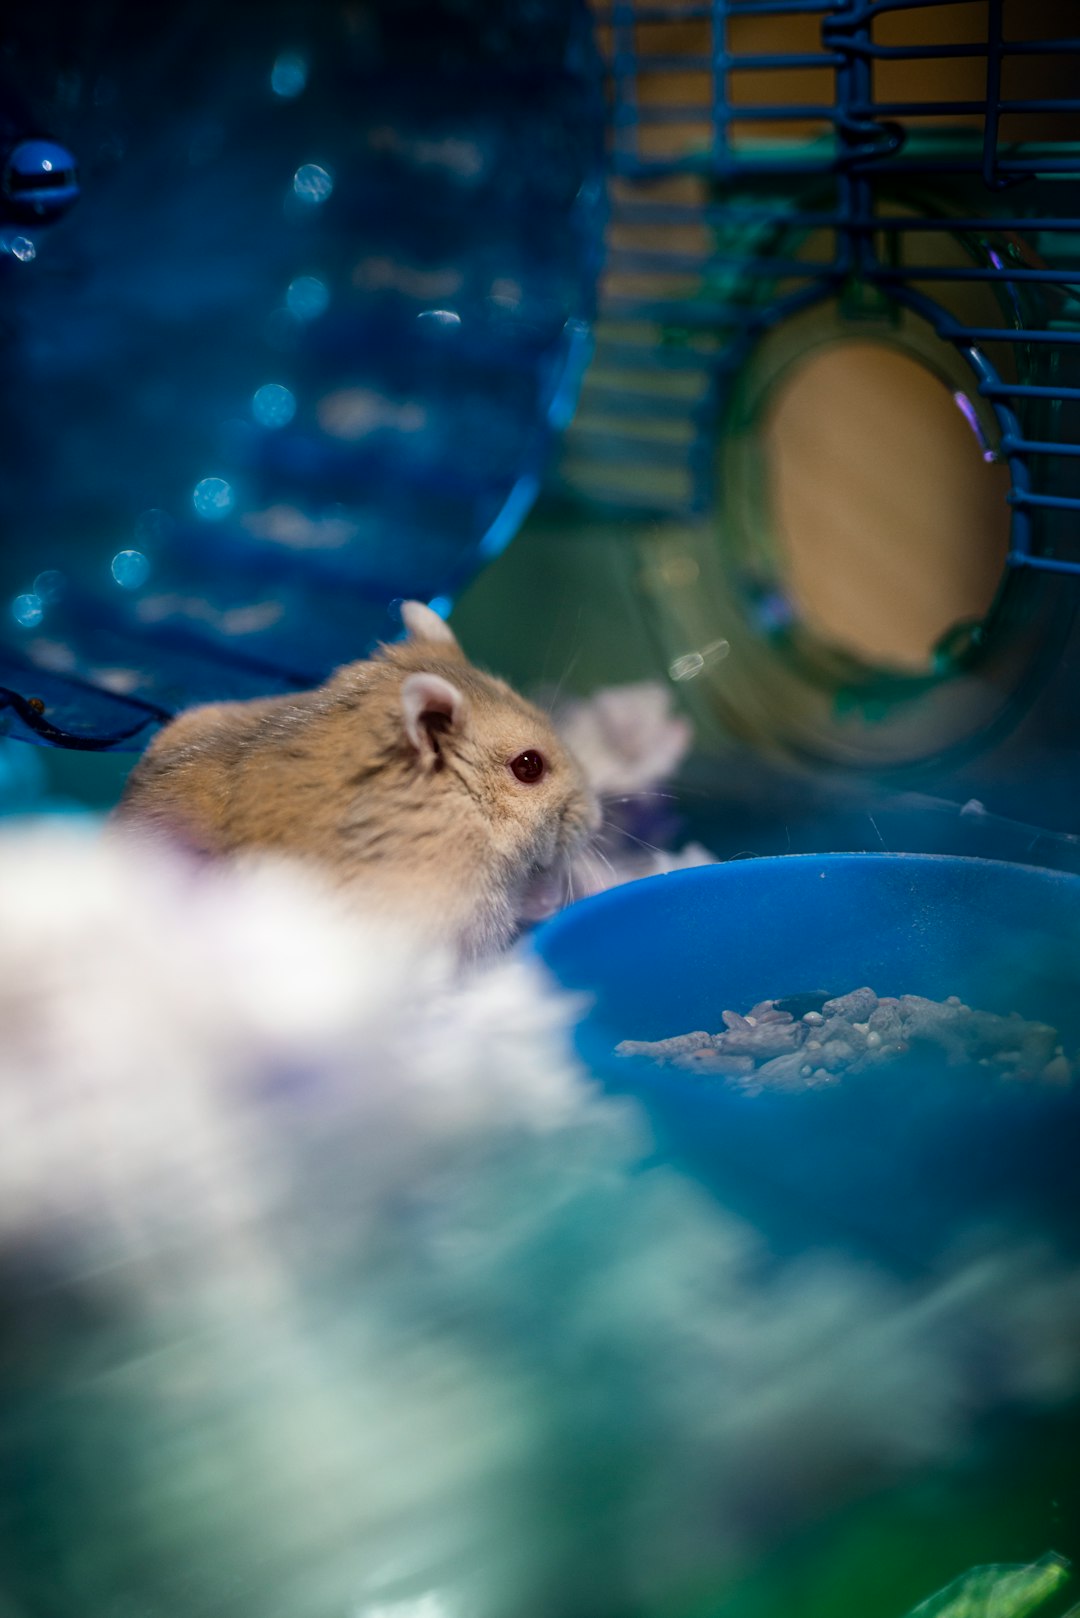 brown and white hamster on blue plastic container